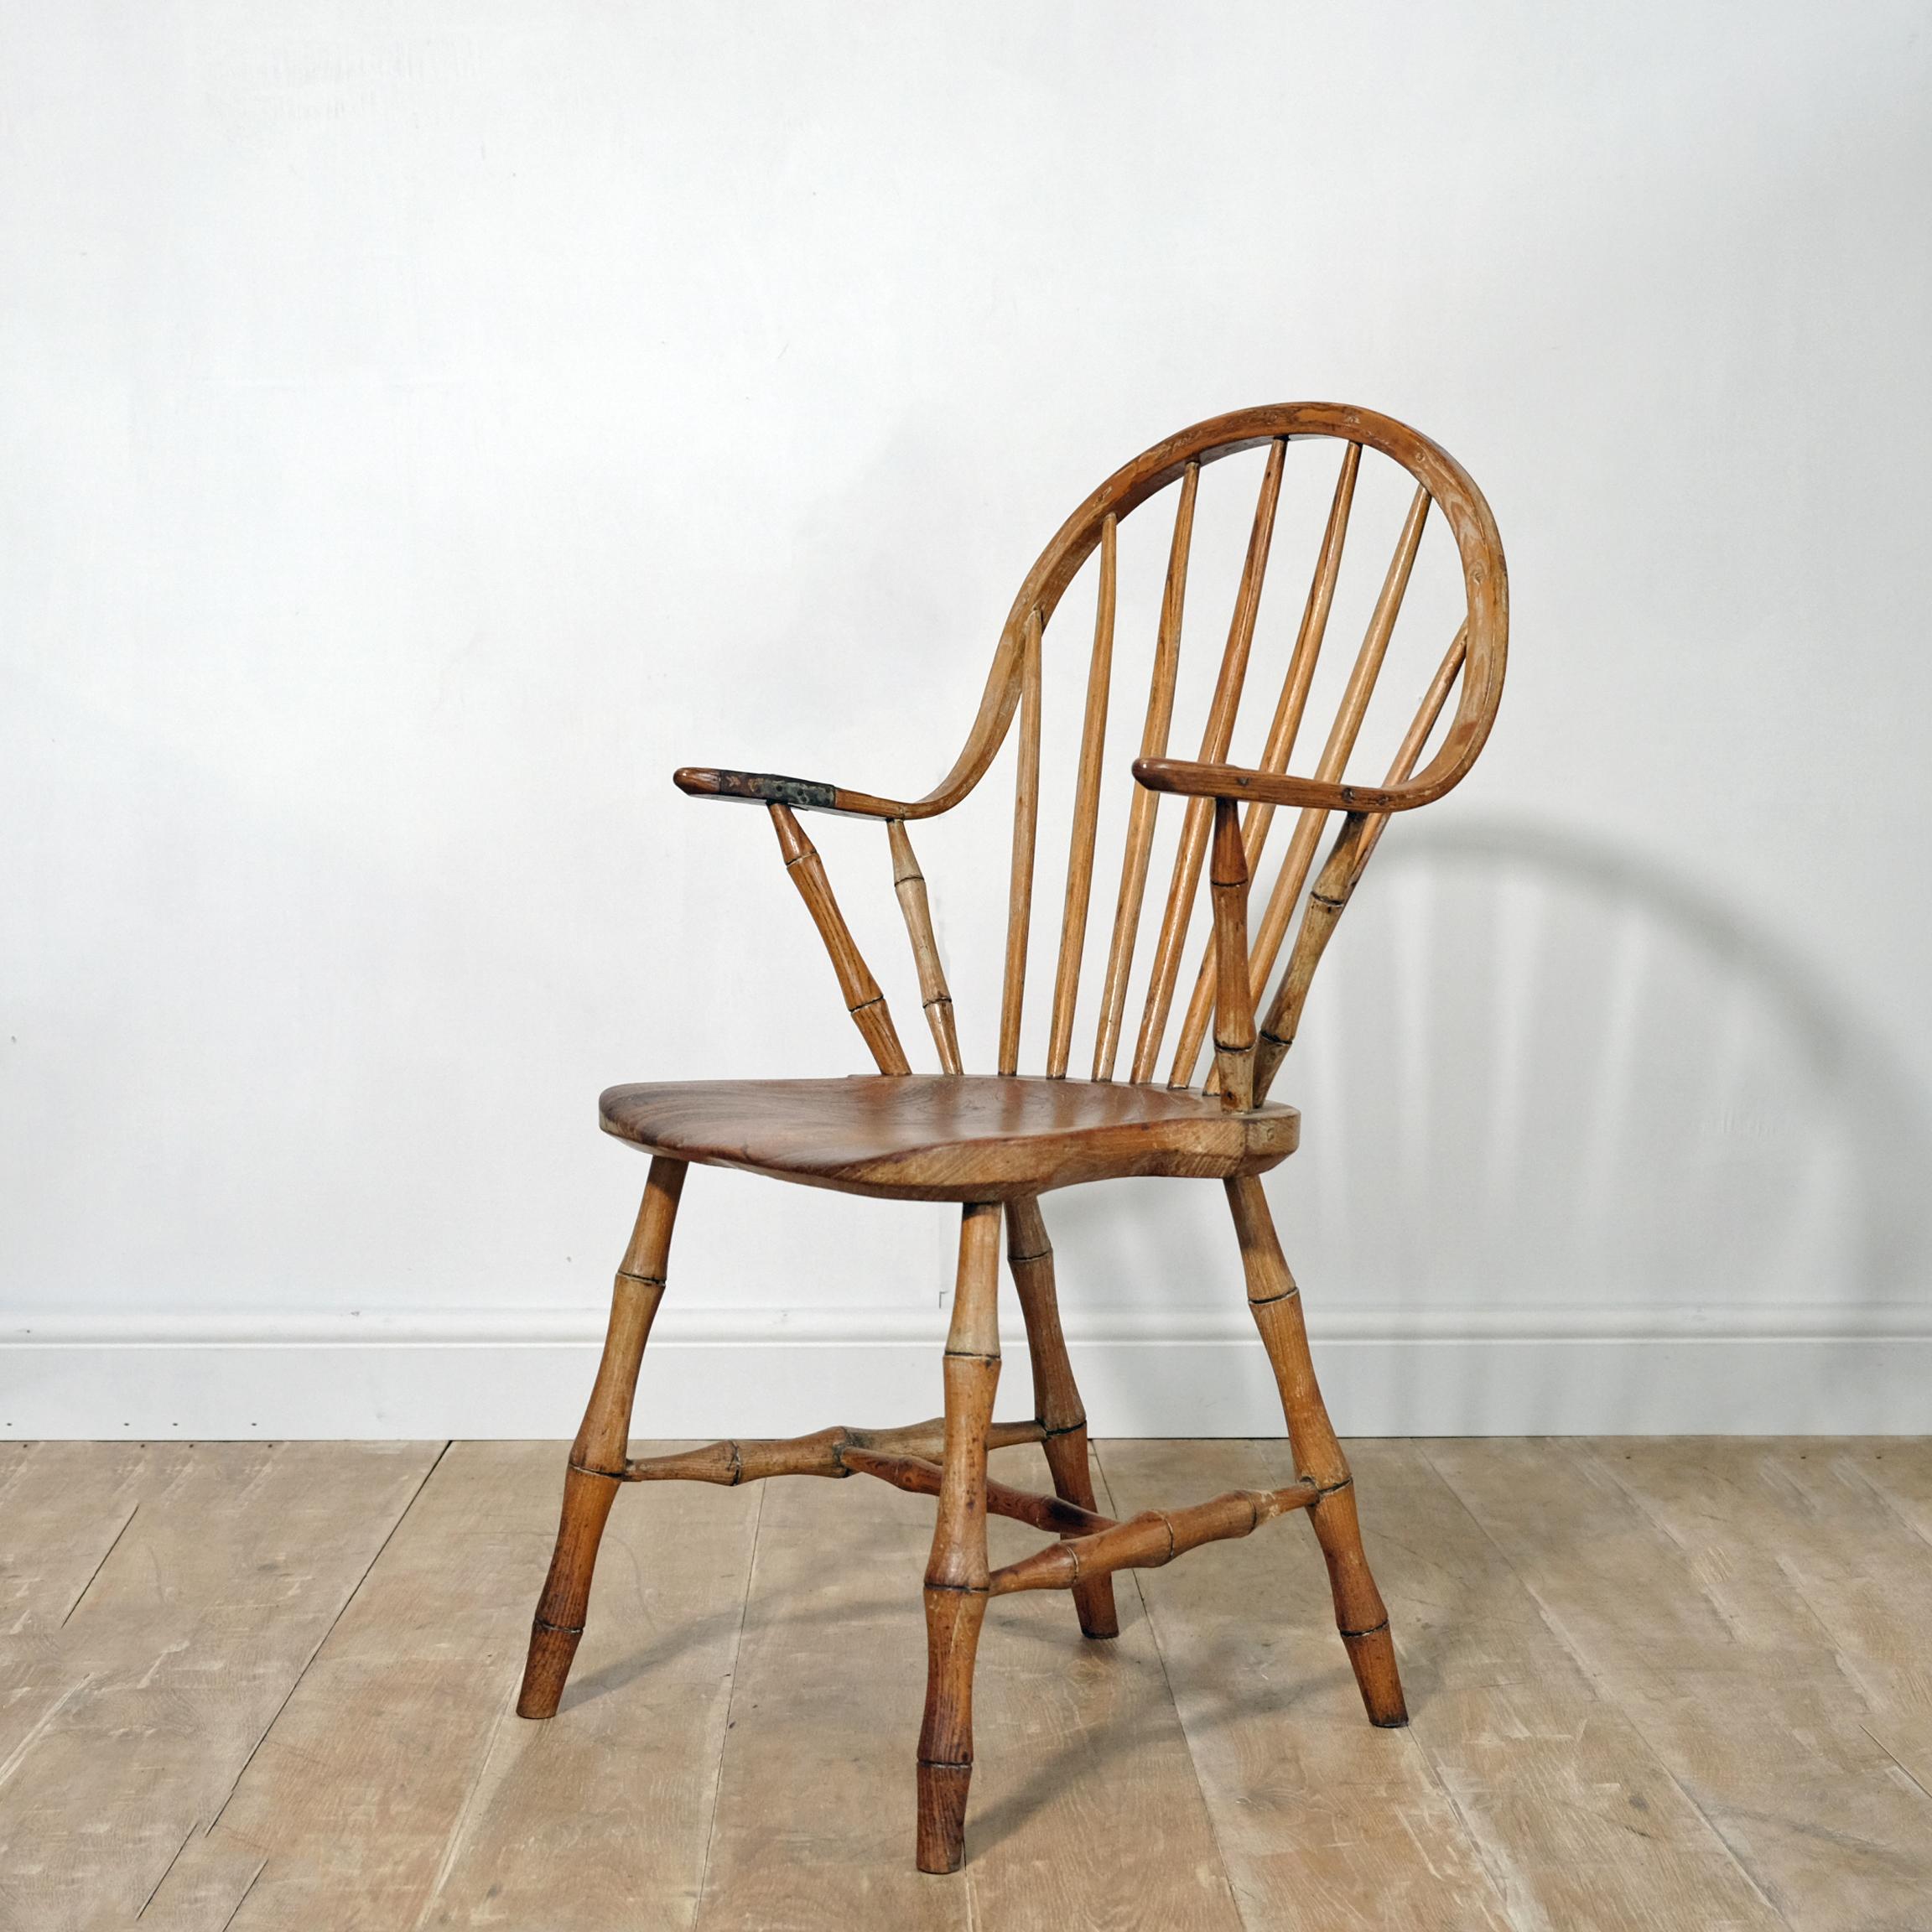 Known as ‘continuous arm’ Windsor chairs, chairs such as this one originate in the small Devon village of Yealmpton (only a few miles from our base). The unusual design then found its way to America in the early 19th century, inhabitants from